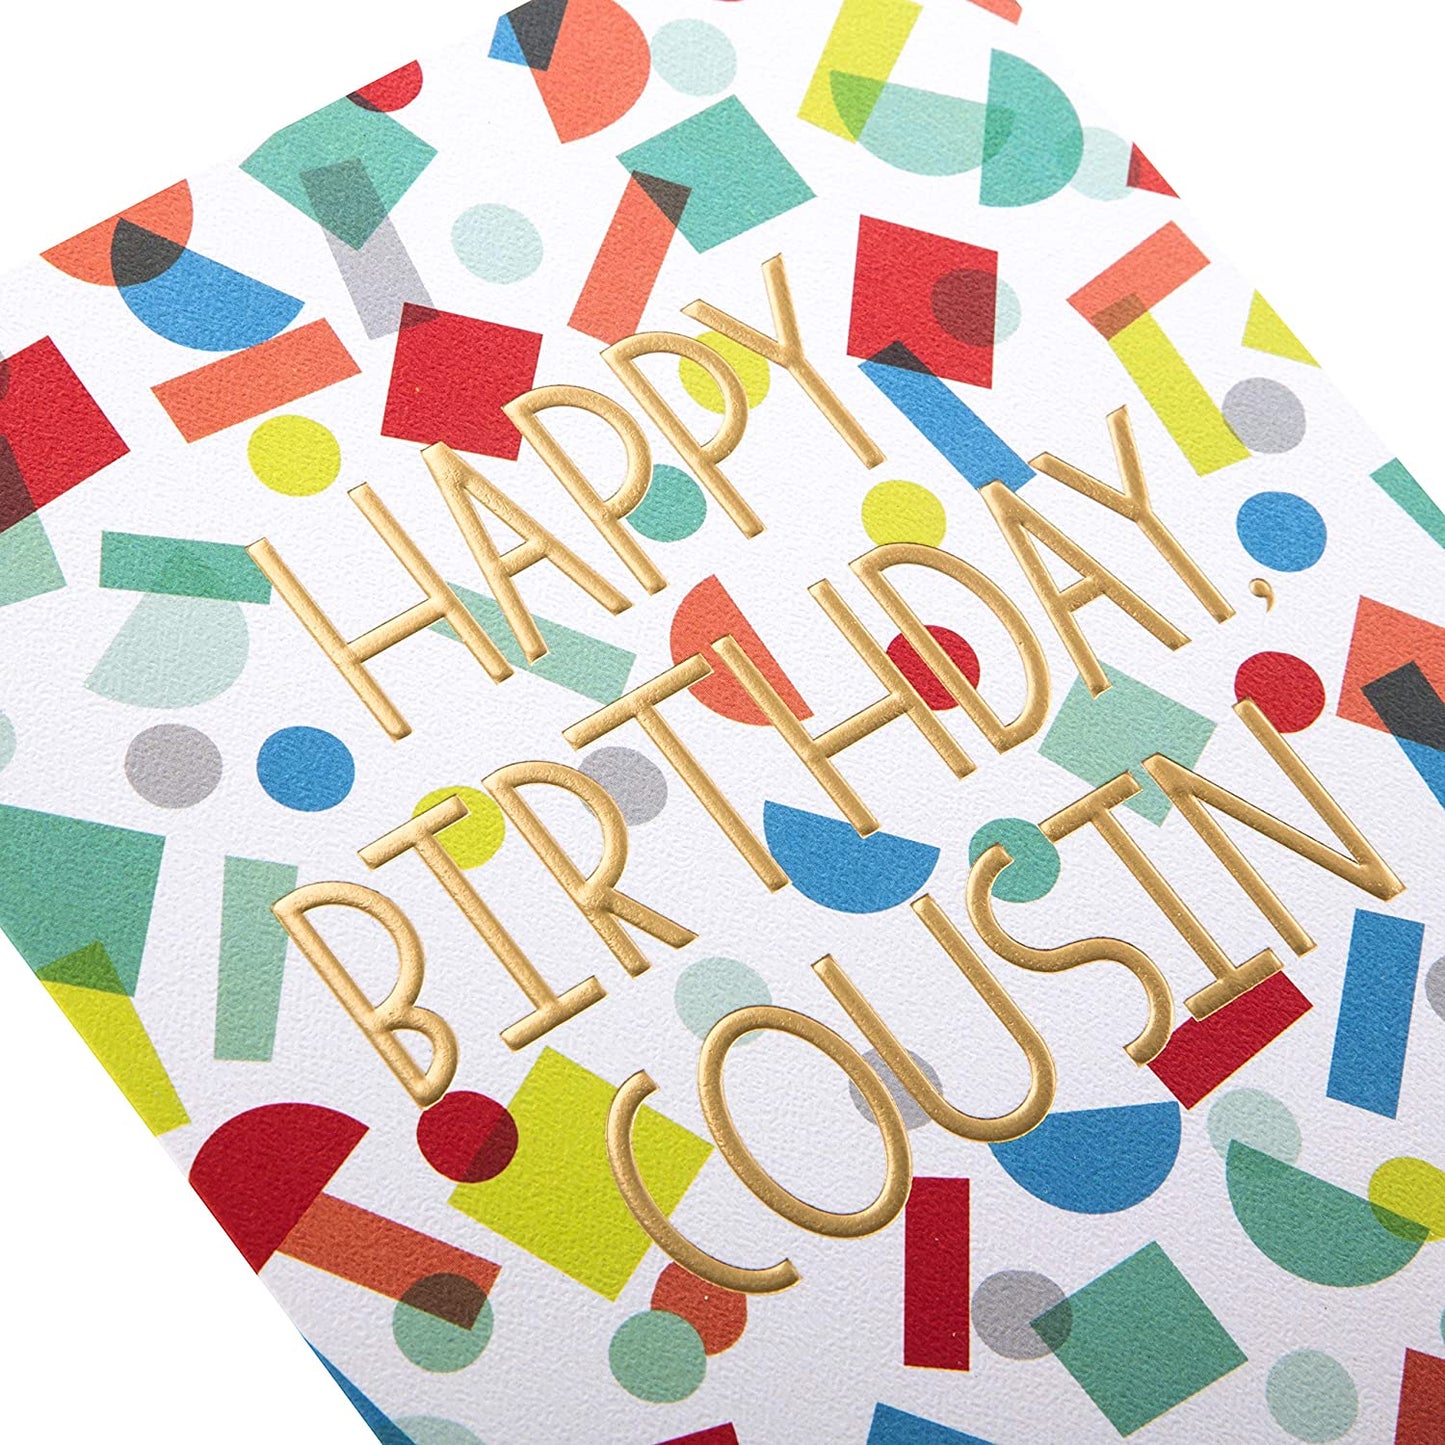 Contemporary Embossed Text Design Cousin Birthday Card